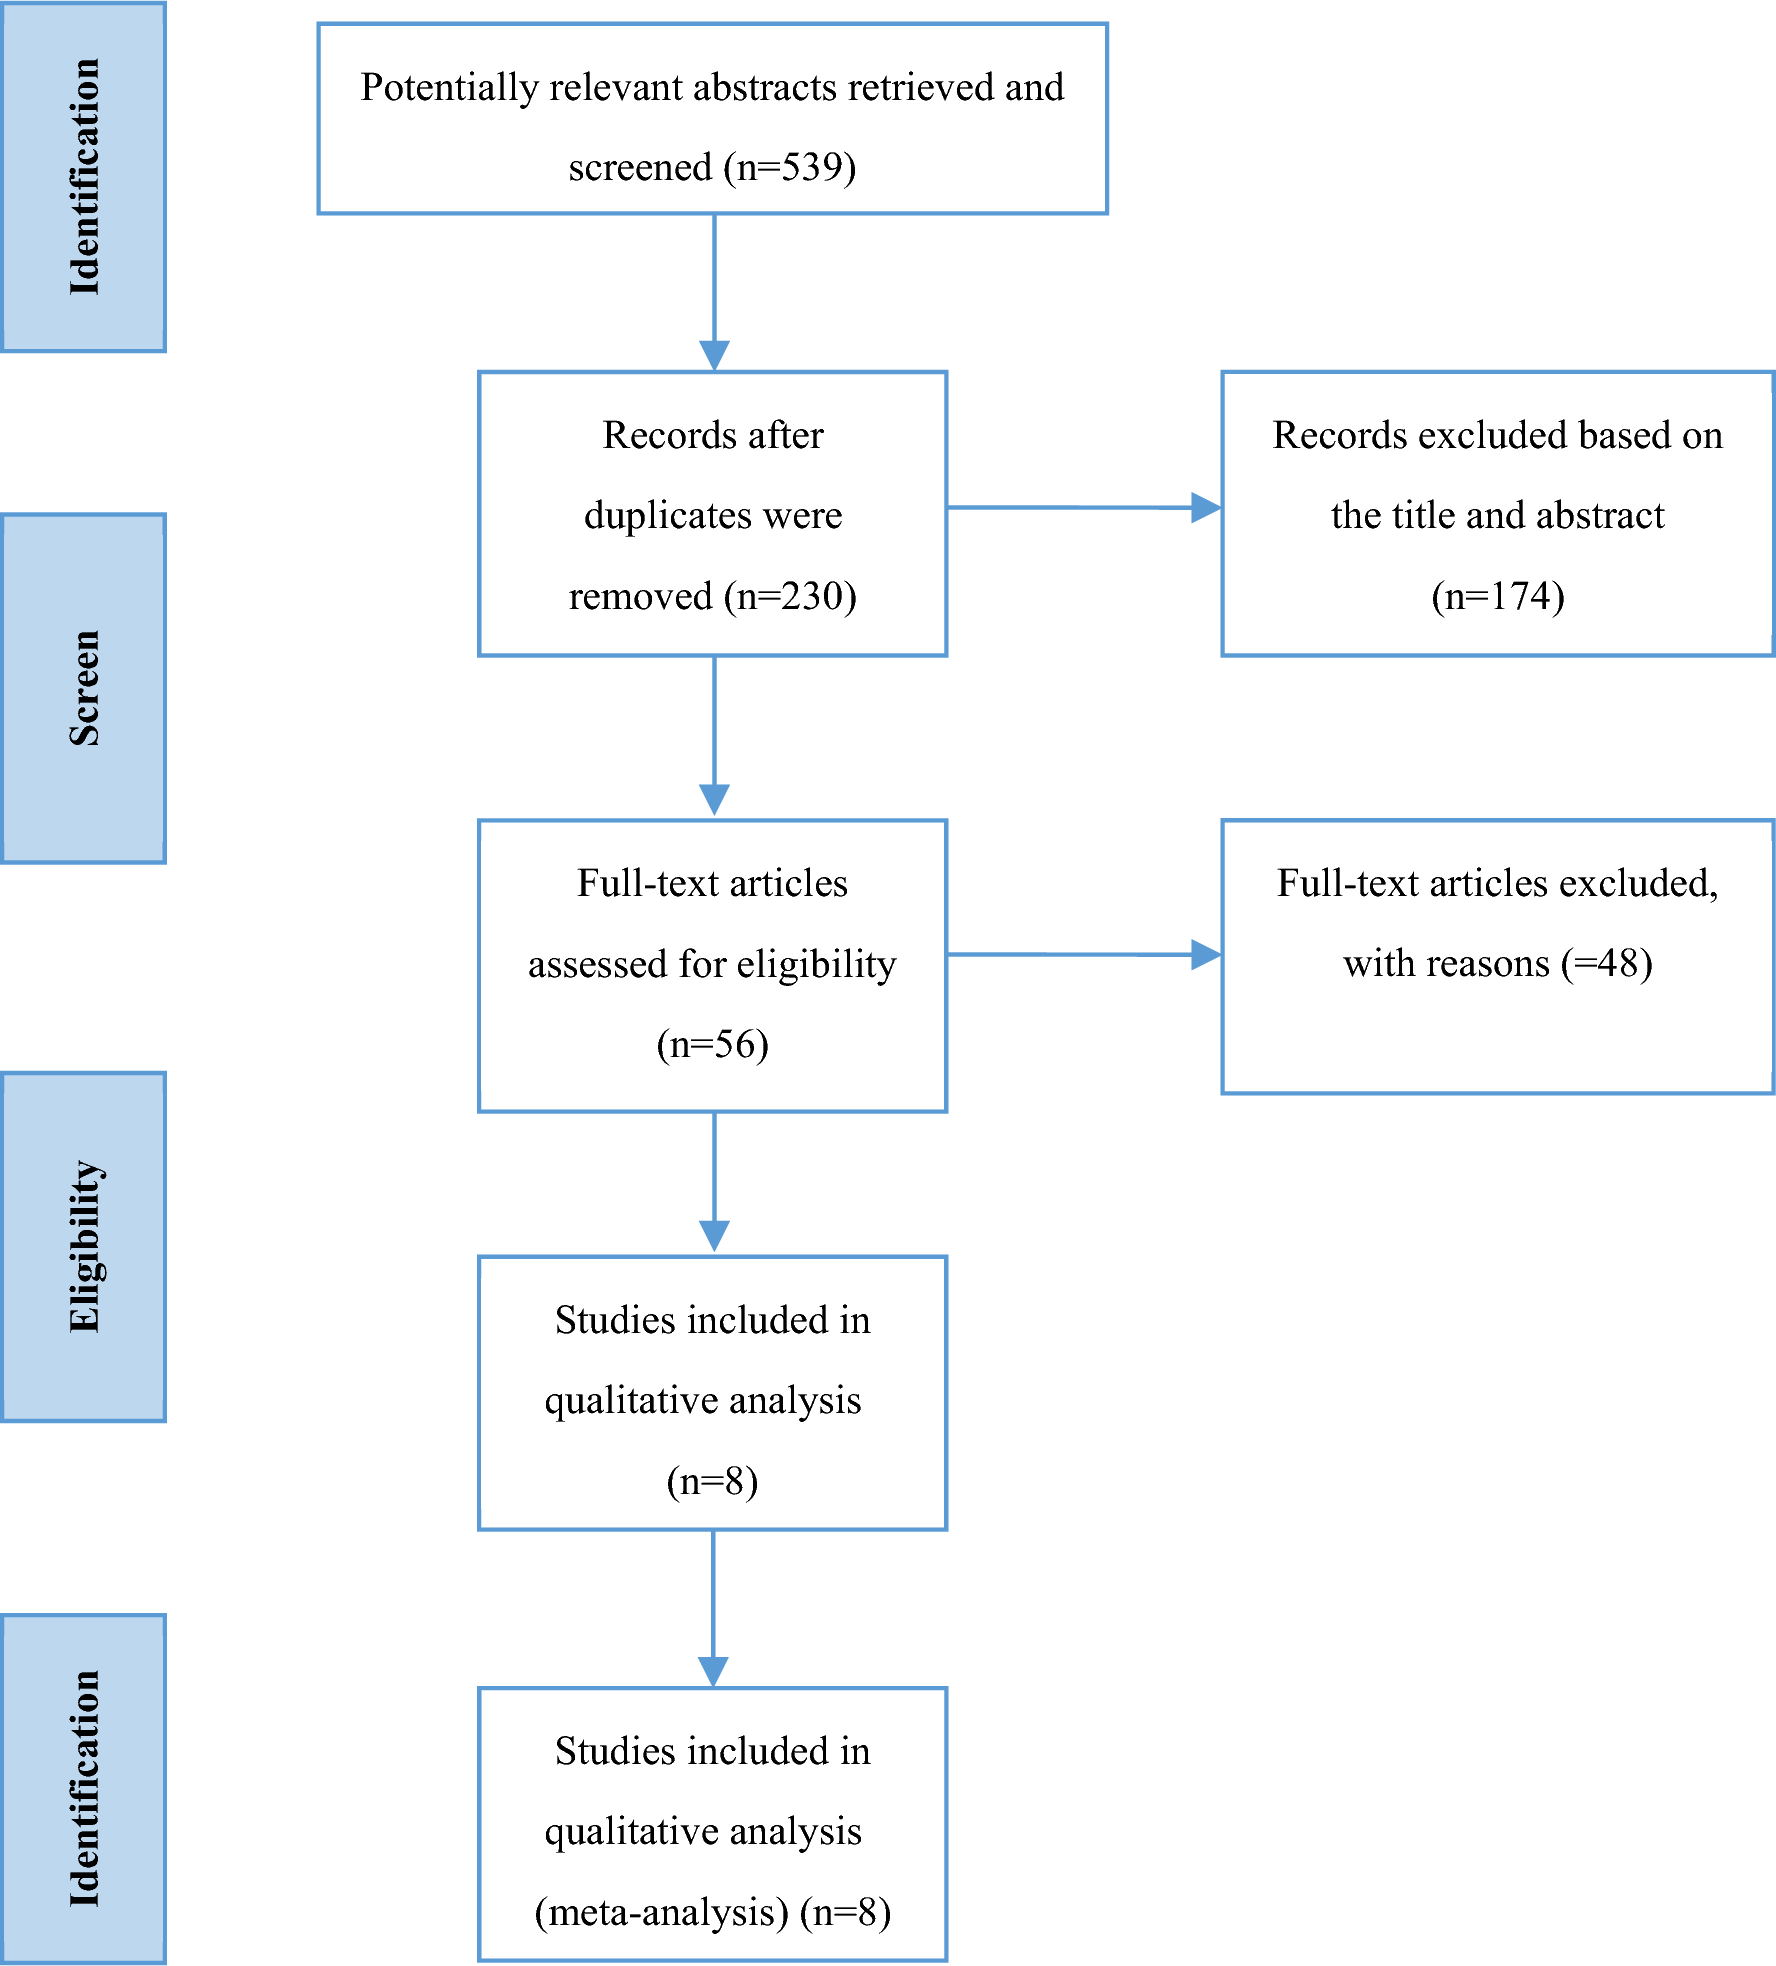 Laparoscopic liver resection is superior to radiofrequency ablation for small hepatocellular carcinoma: a systematic review and meta-analysis of propensity score-matched studies